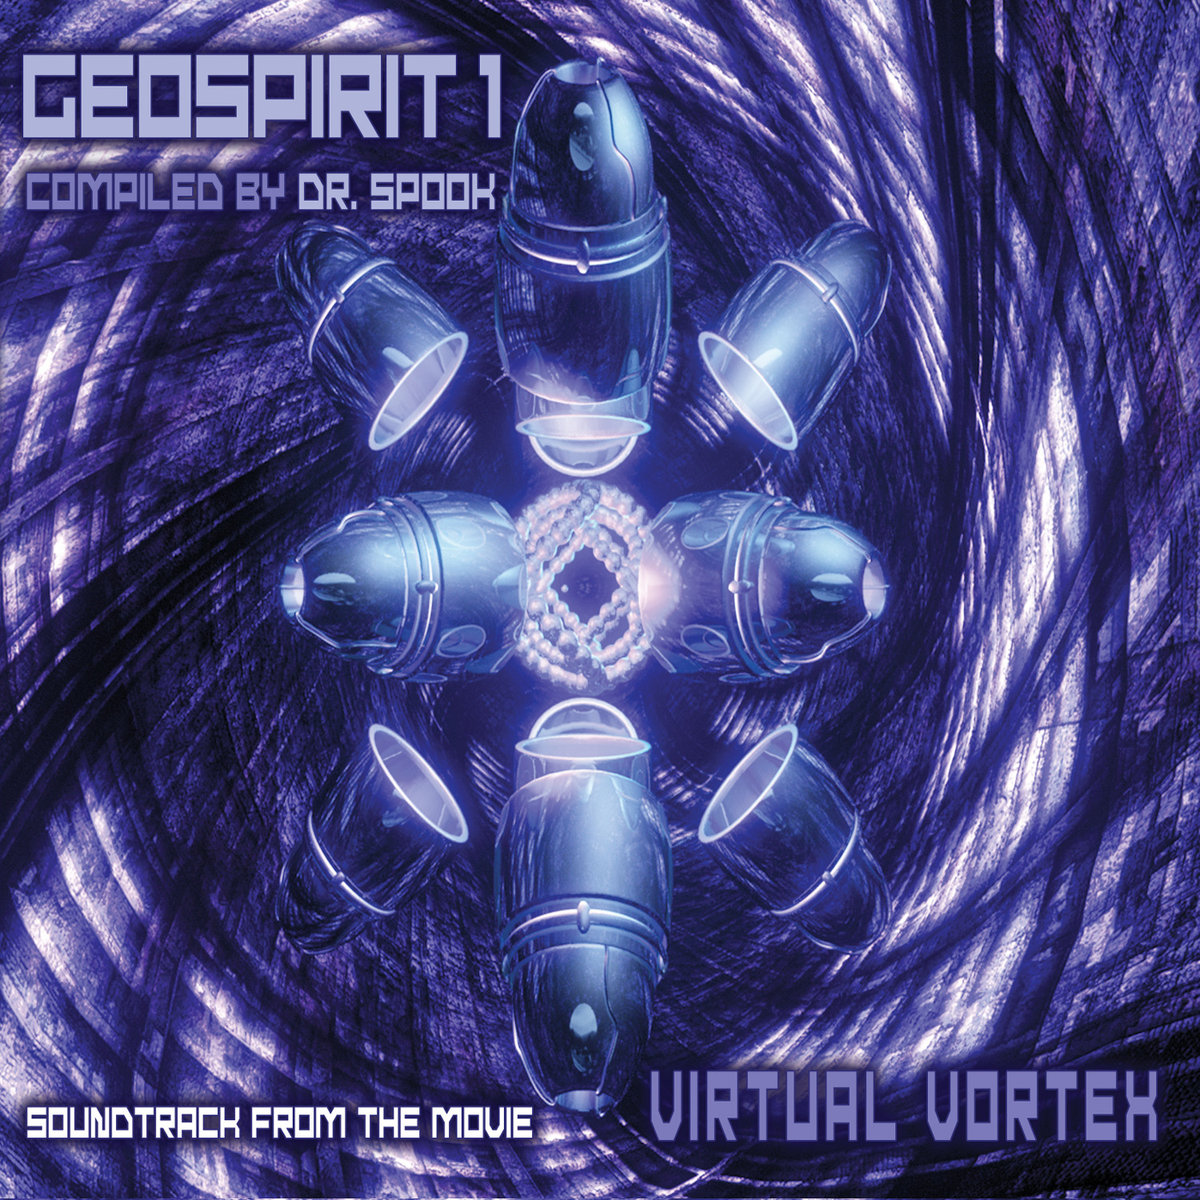 Earthling & Phoenix Family - Killer Dope @ 'Various Artists - Geospirit 1: Virtual Vortex (Compiled by Dr. Spook)' album (electronic, goa)